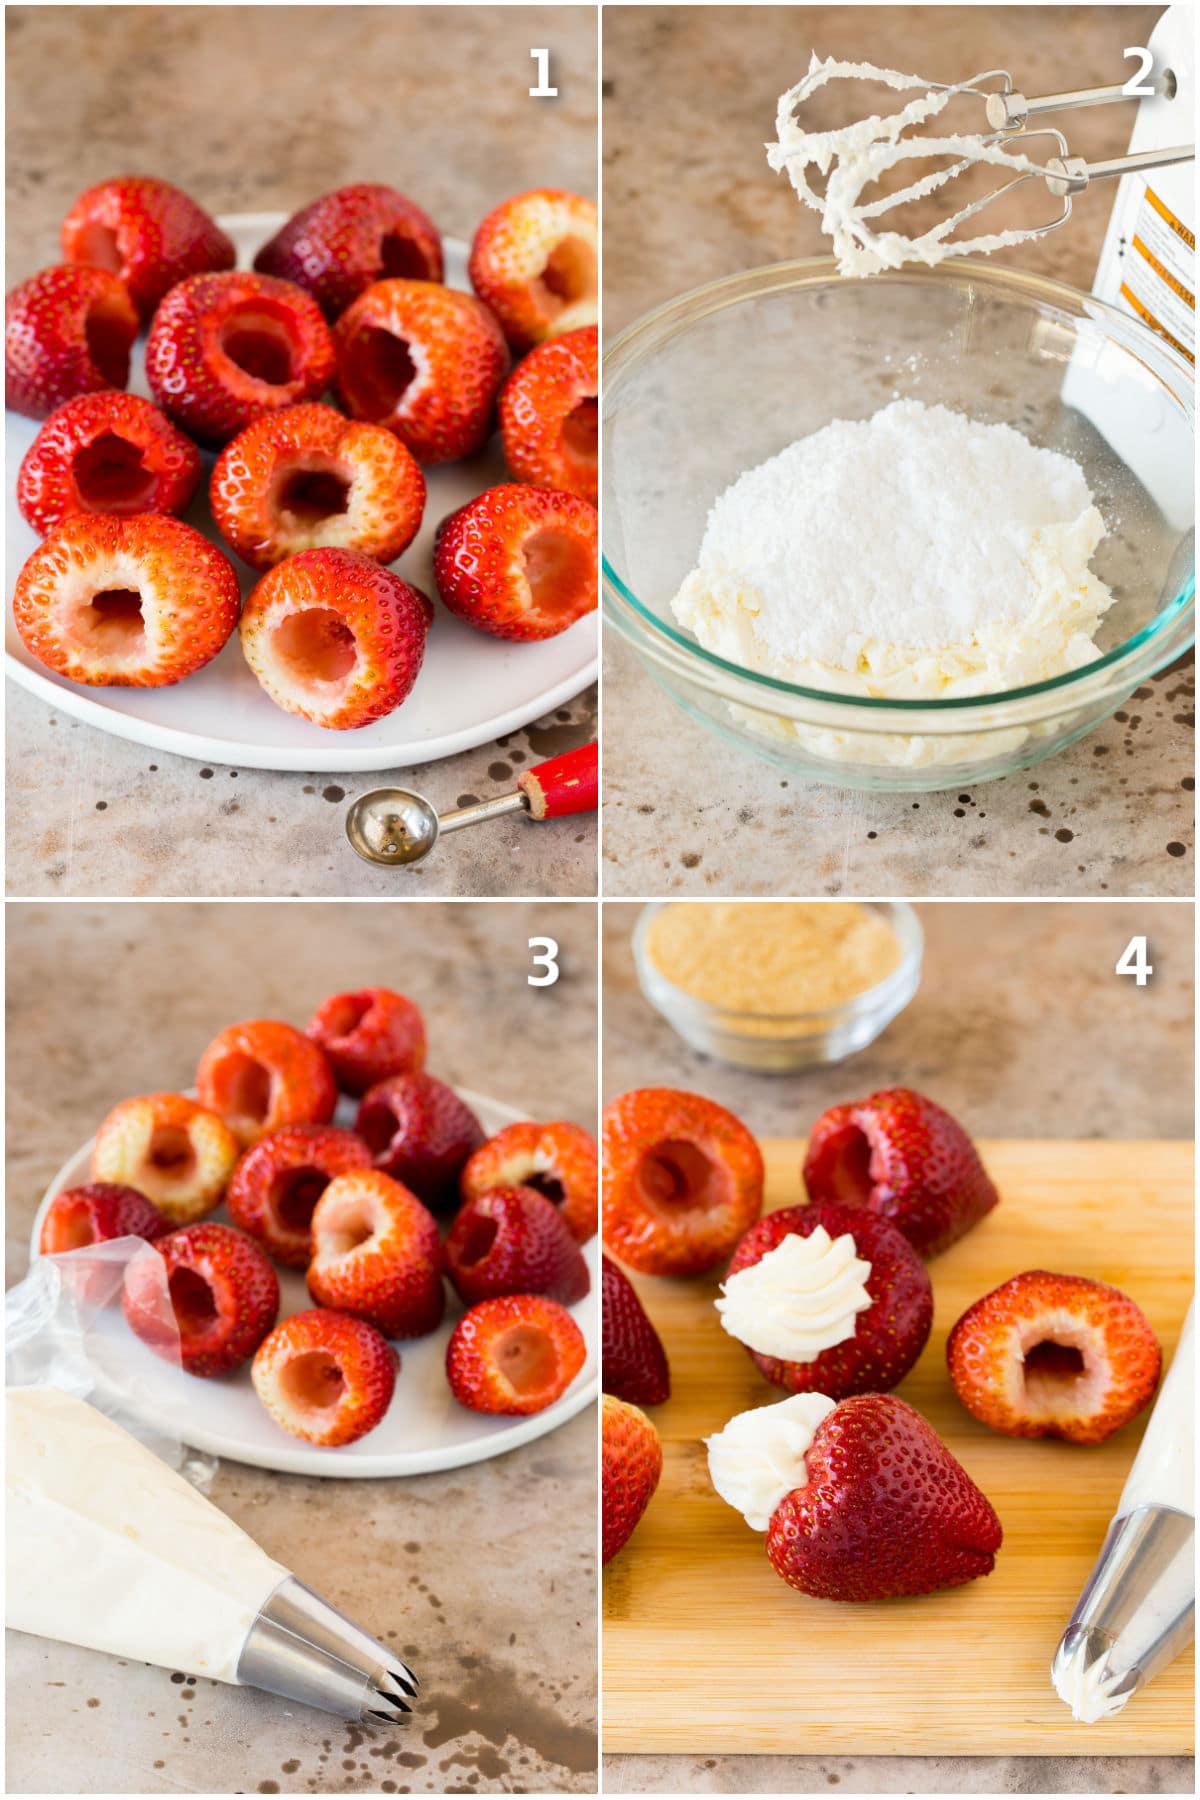 Step by step shots showing how to stuff strawberries with cheesecake.